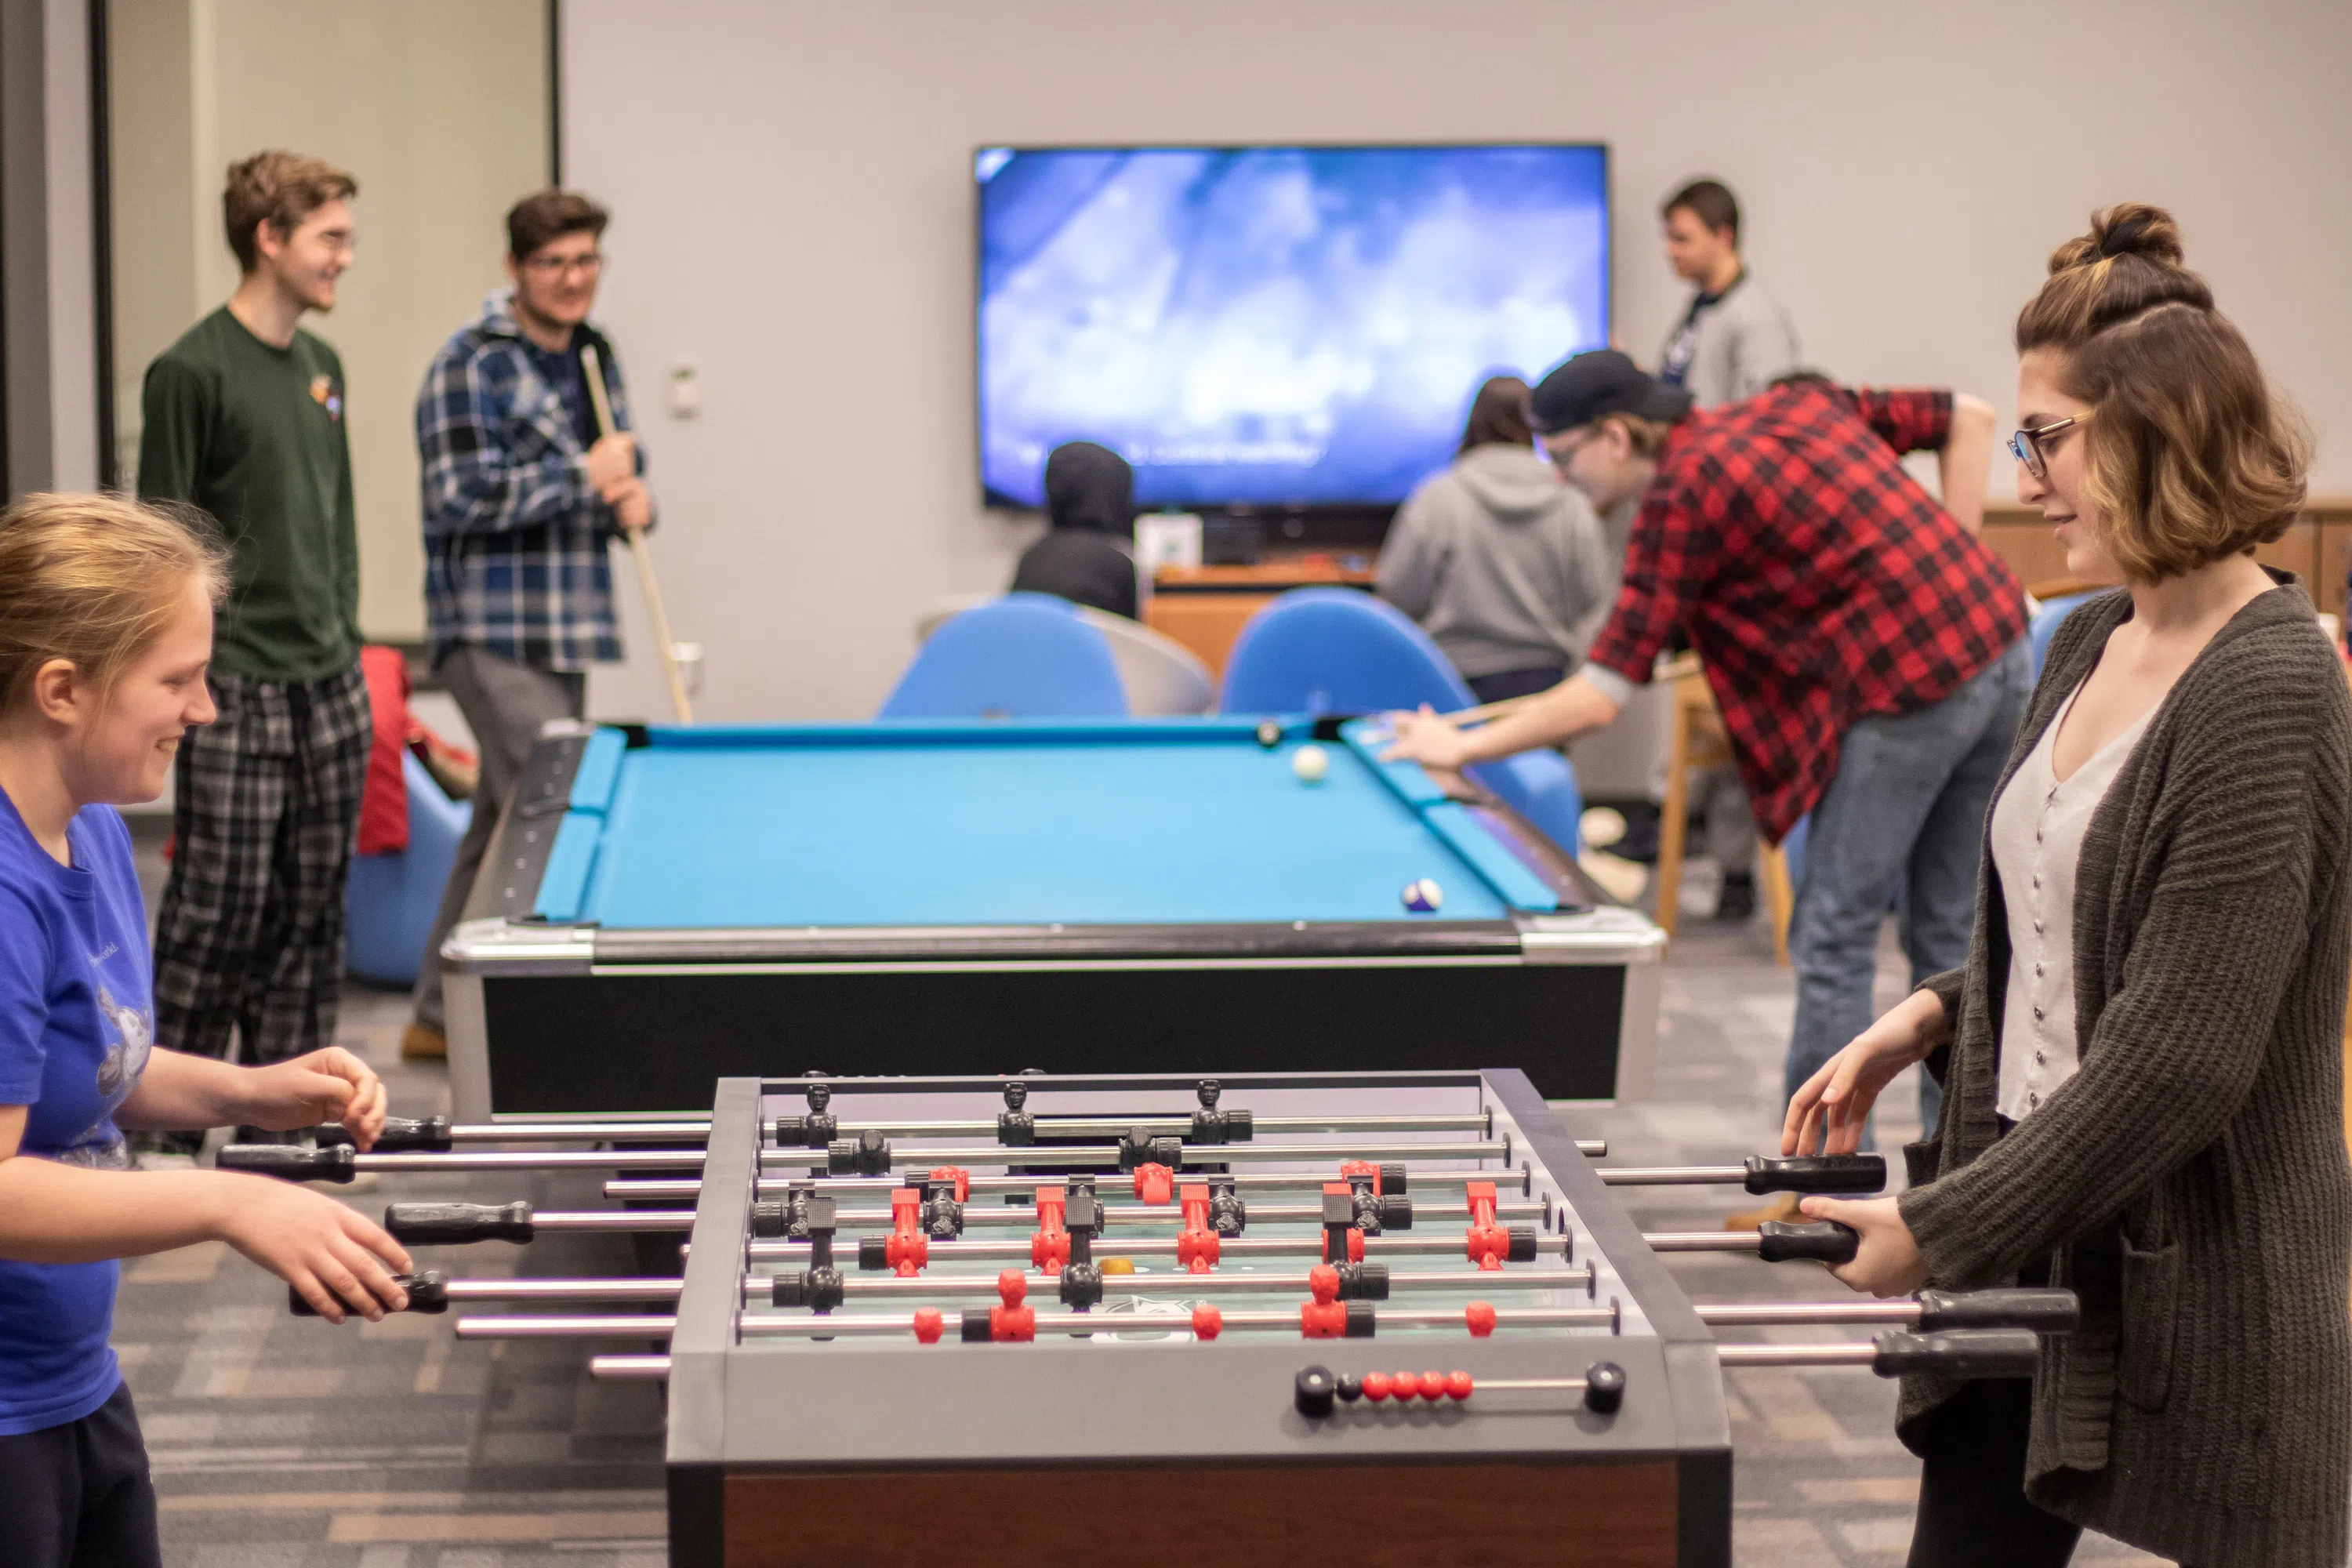 students play foosball, pool, and watch a television